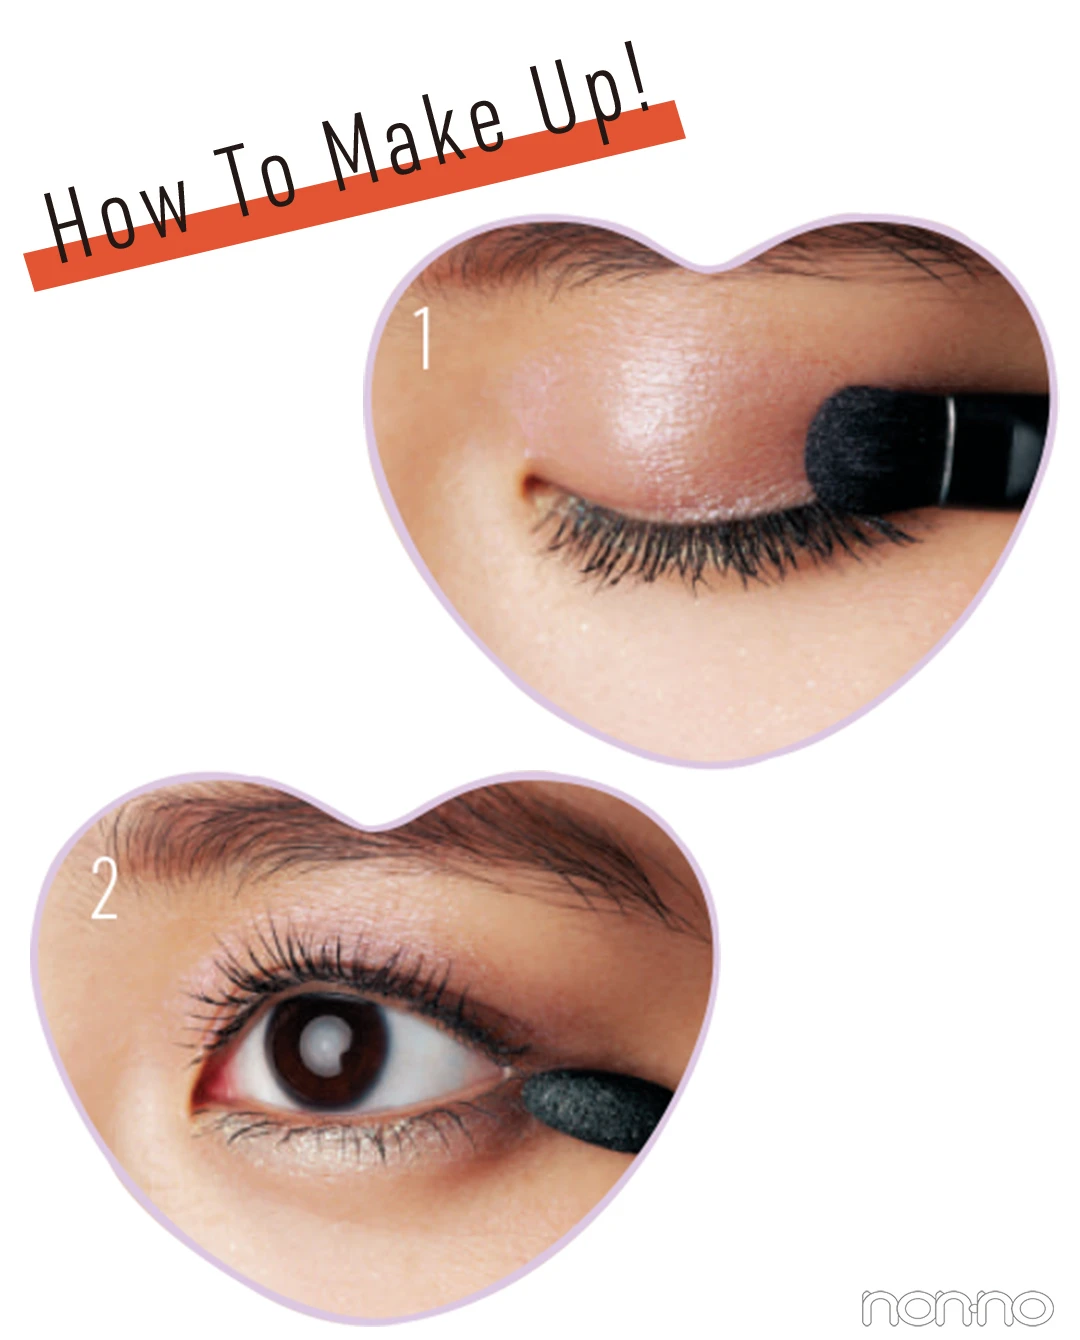 How To Make Up!